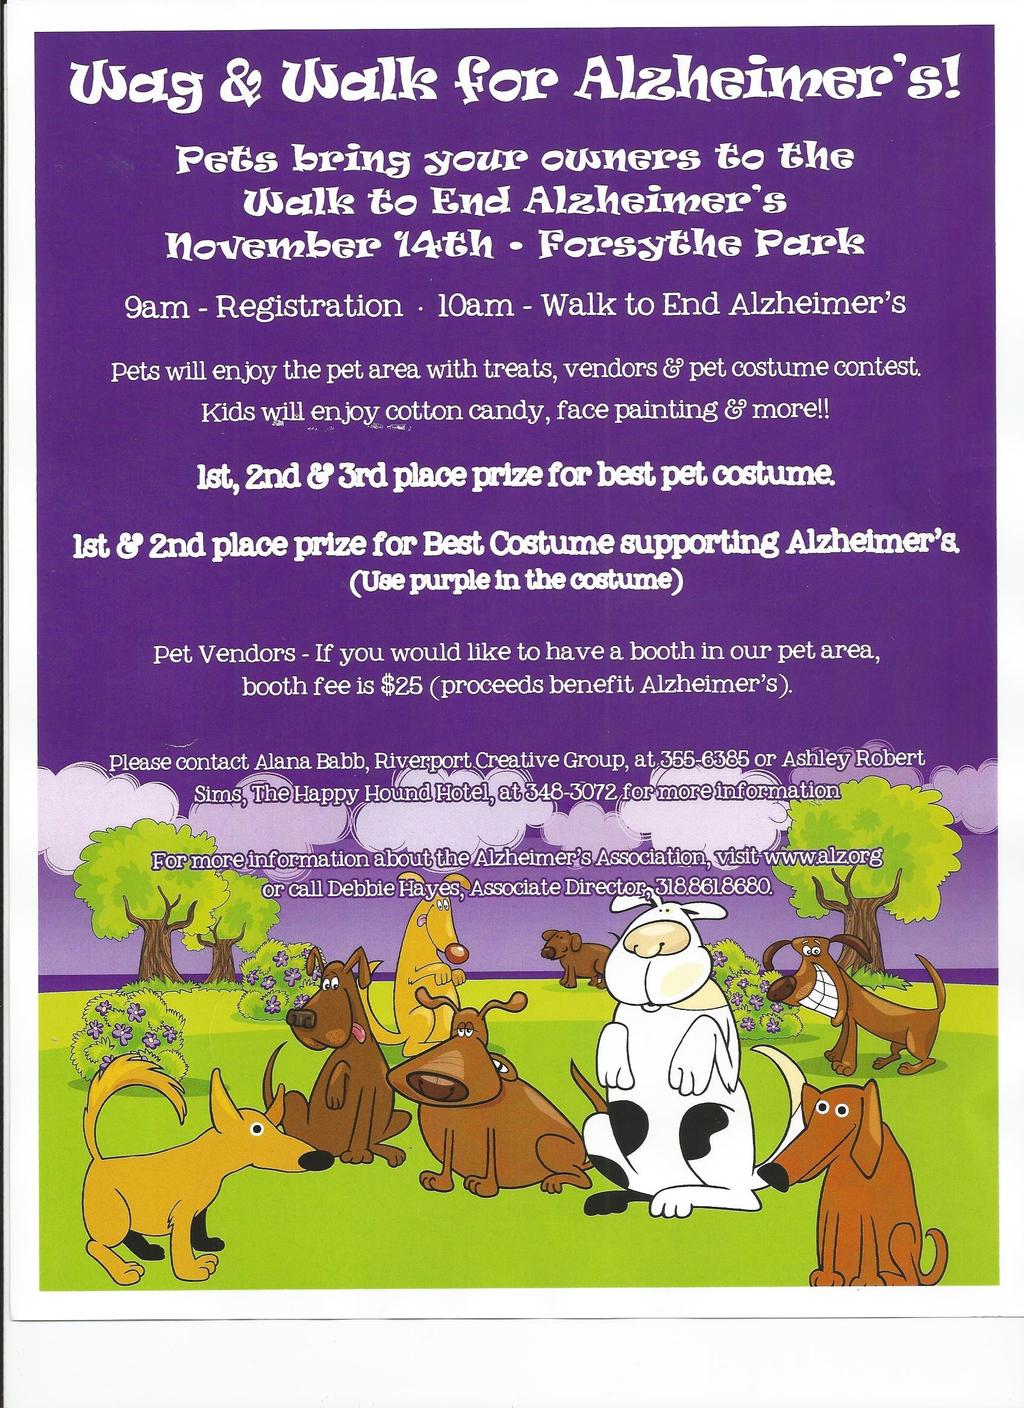 Please join the OVDTC as we participate in the Wag & Walk for Alzheimer s!